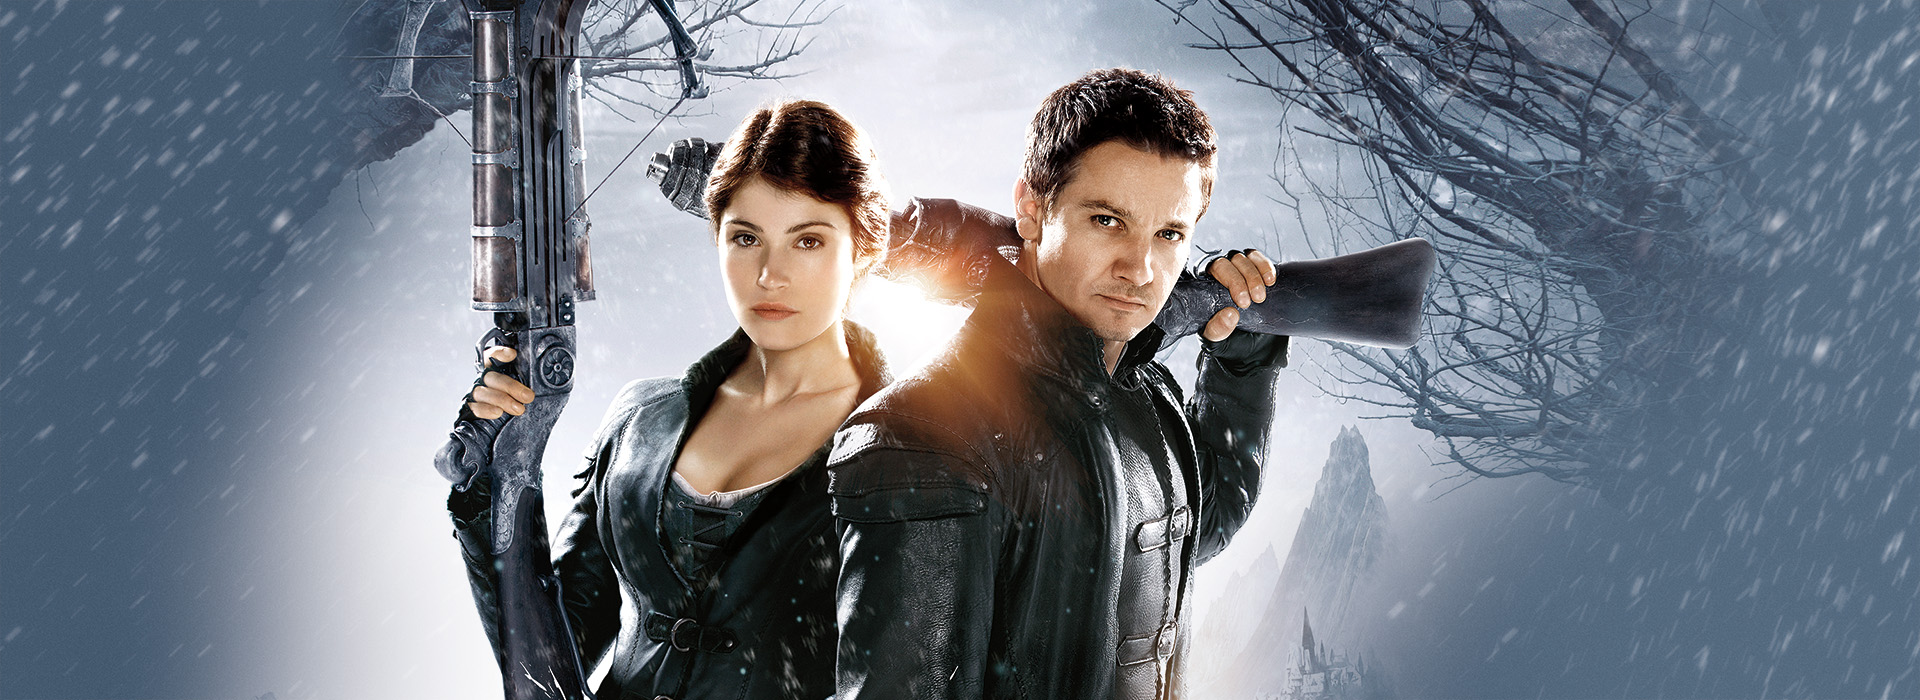 Movie poster Hansel & Gretel: Witch Hunters